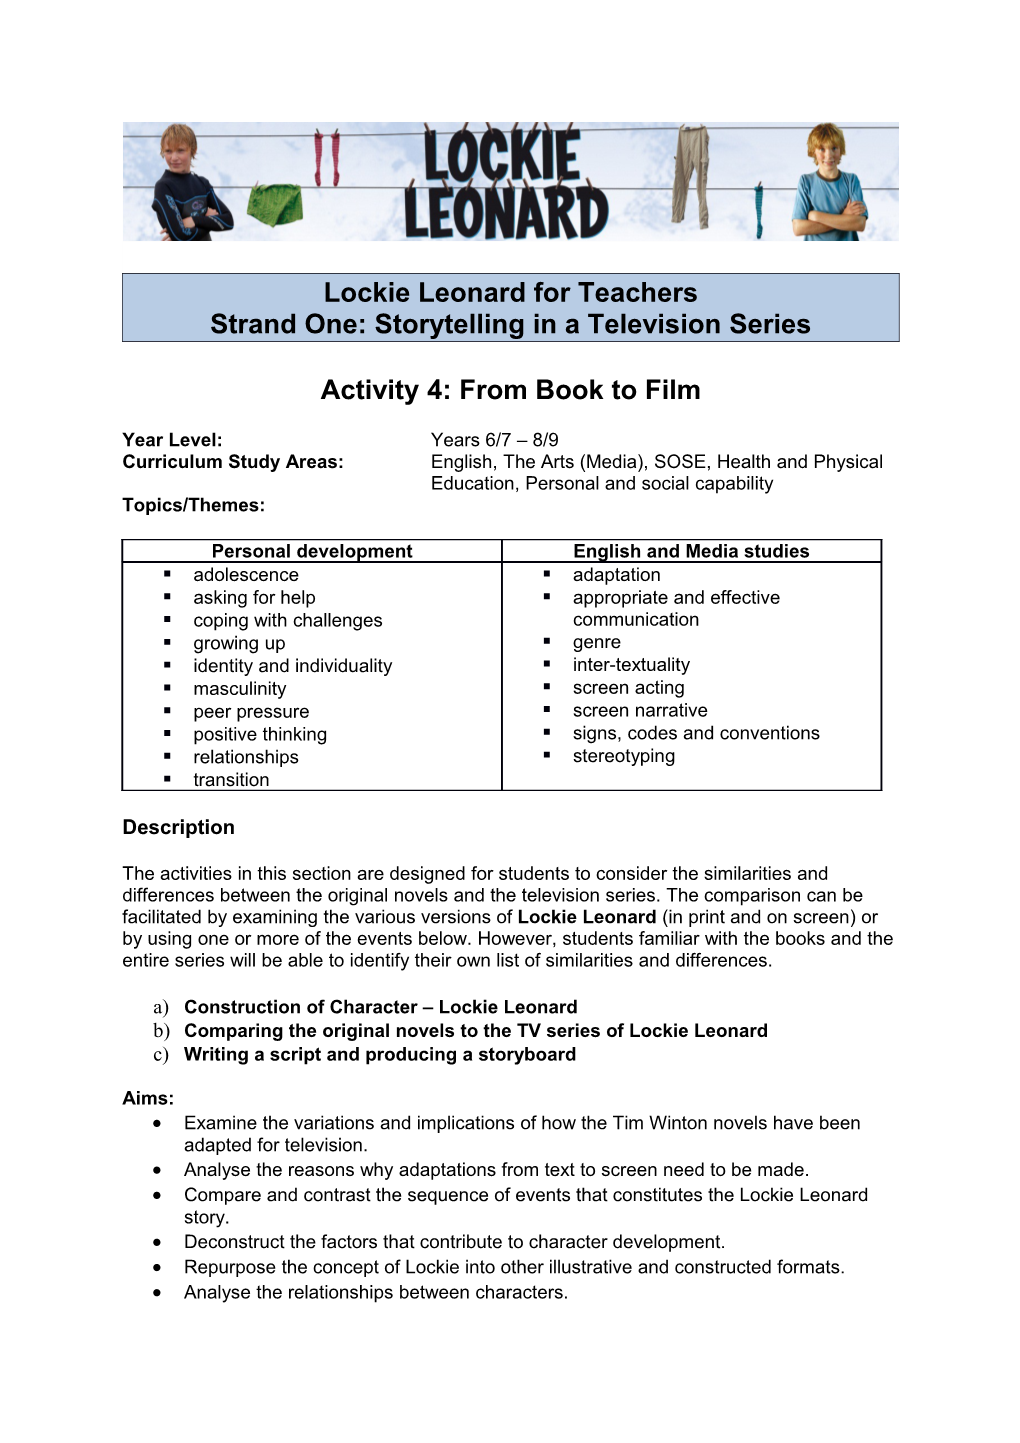 Activity 4: from Book to Film